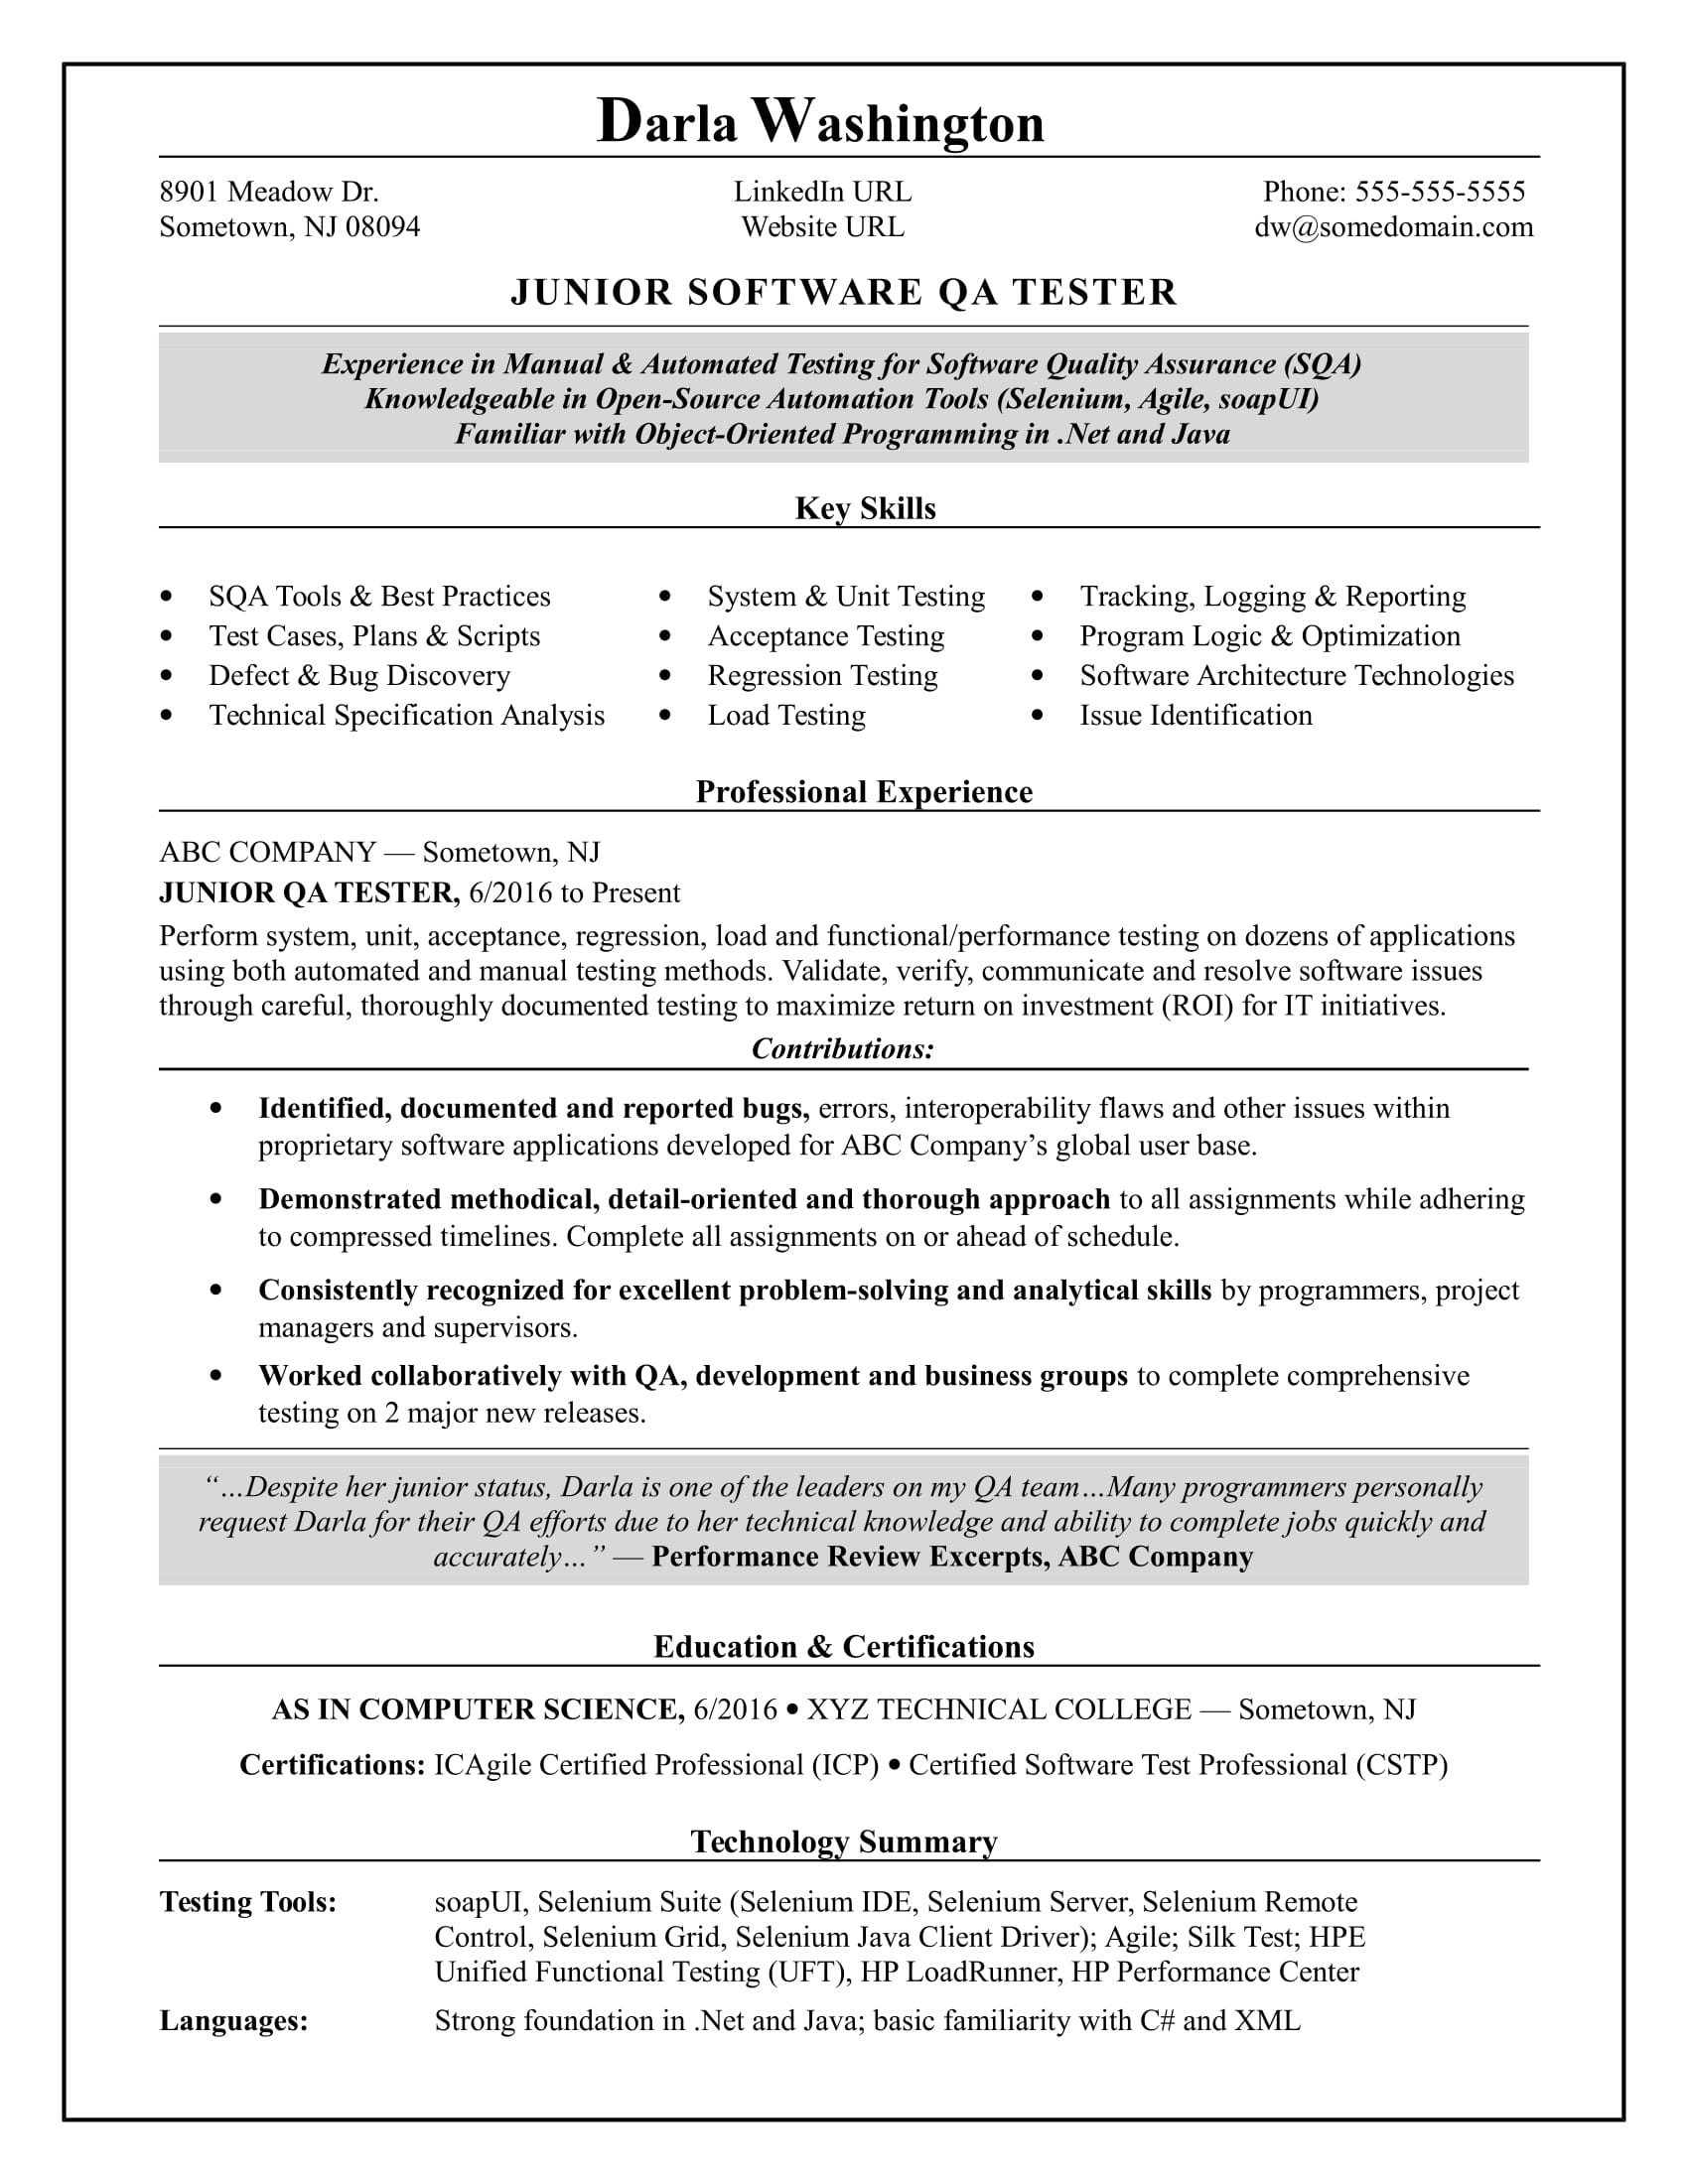 Resume for Qa In State Projects Sample Entry-level software Tester Resume Monster.com